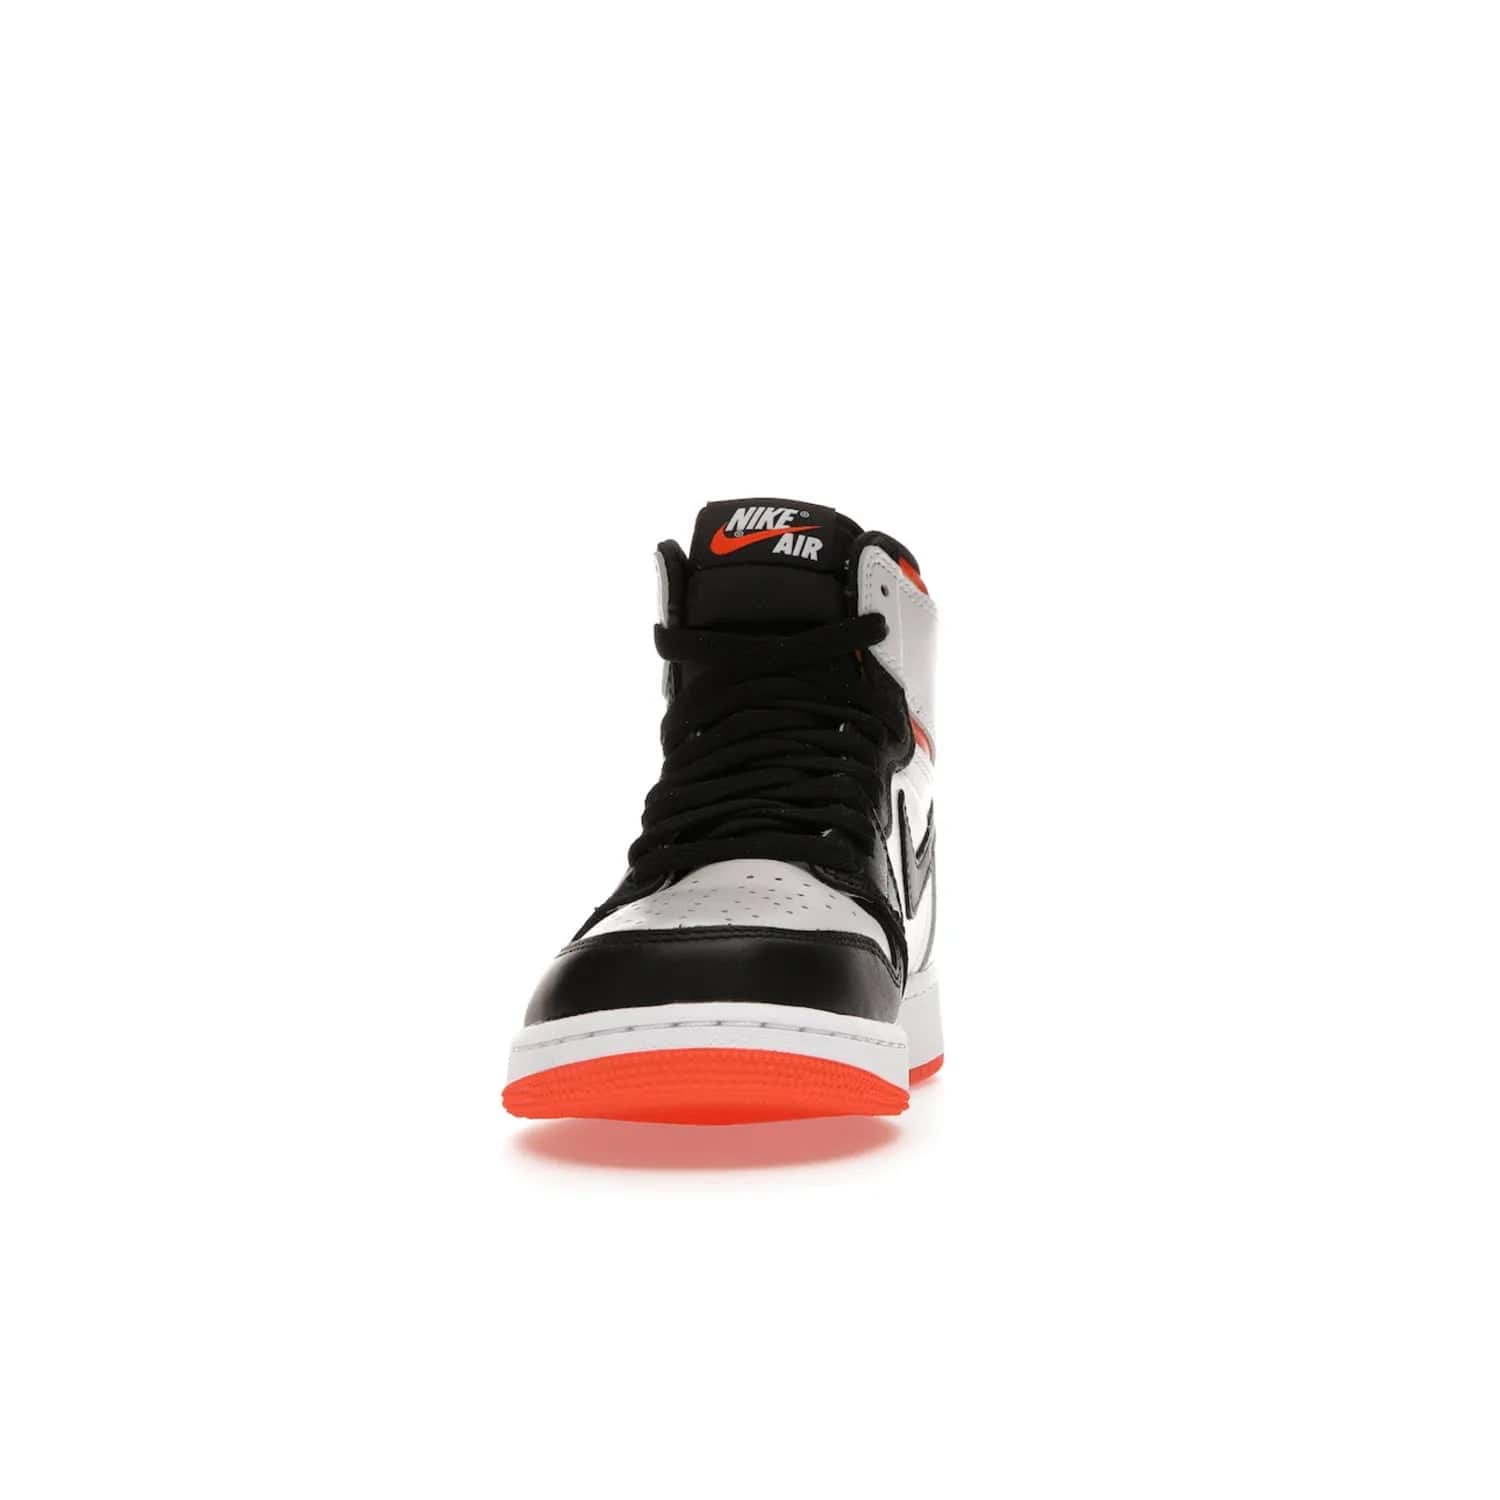 Jordan 1 High OG Electro Orange (GS) - Image 11 - Only at www.BallersClubKickz.com - The Air Jordan 1 High OG Electro Orange GS is the ideal shoe for kids on the go. Featuring white leather uppers, black overlays, and bright orange accents, it's sure to become a favorite. A great mix of classic style and vibrant colors, the shoe delivers air cushioning for comfort and hard orange rubber for grip. Release on July 17th, 2021. Get them a pair today.